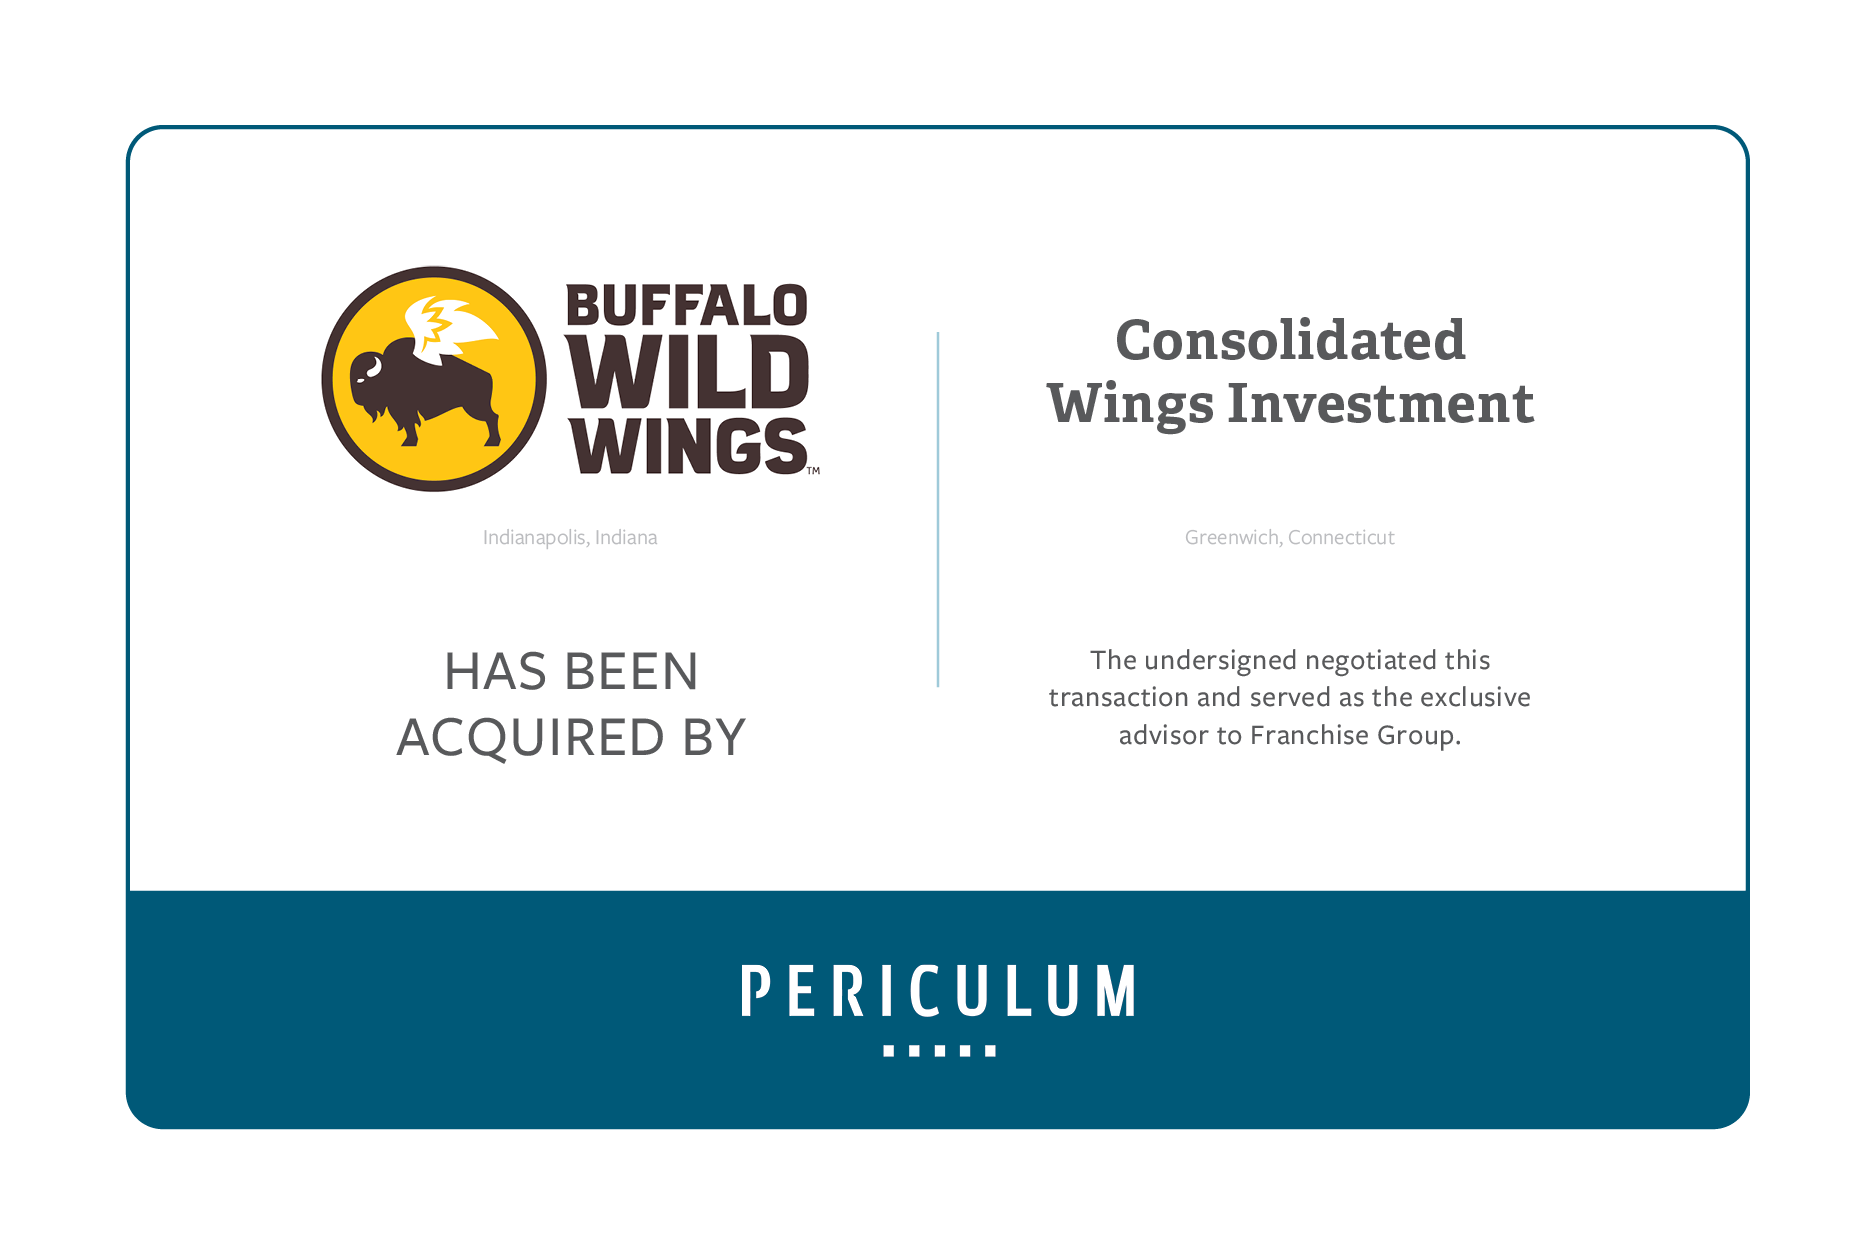 Periculum Buffalo Wild Wings® Franchisee Group in sale to Wings Investment, LLC Periculum Capital